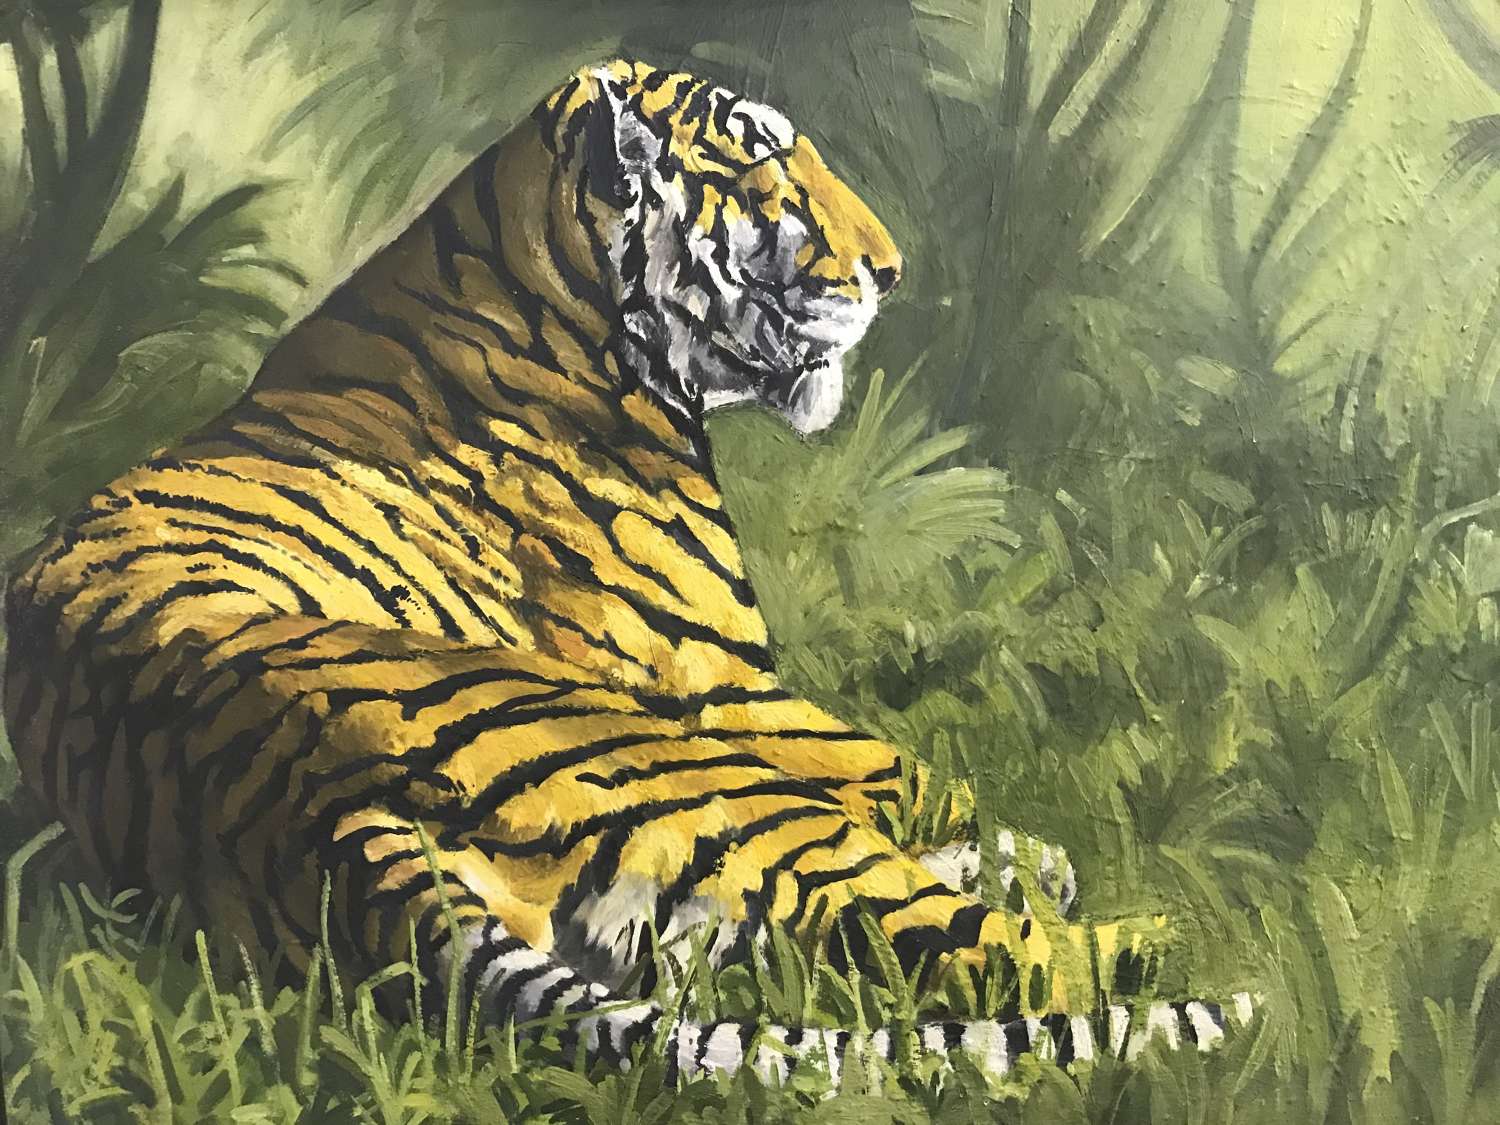 Oil painting of a restingTiger by David Lee